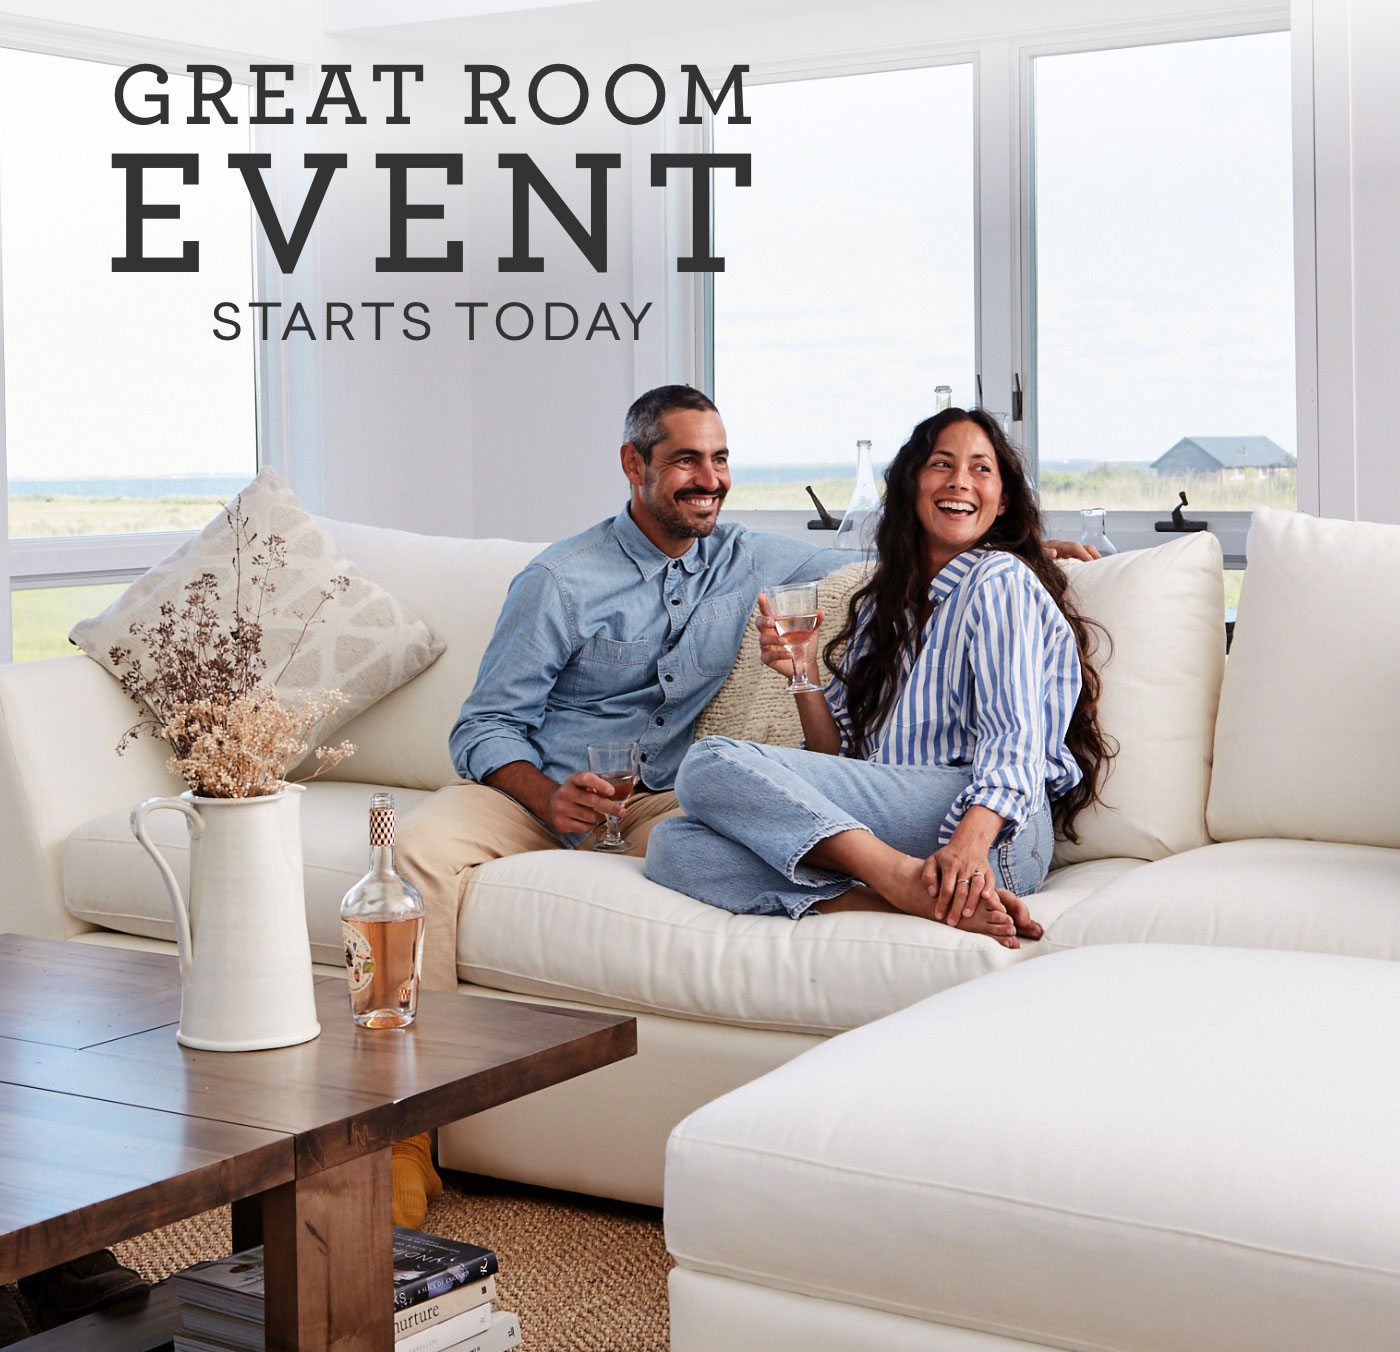 Great room event. Starts today.